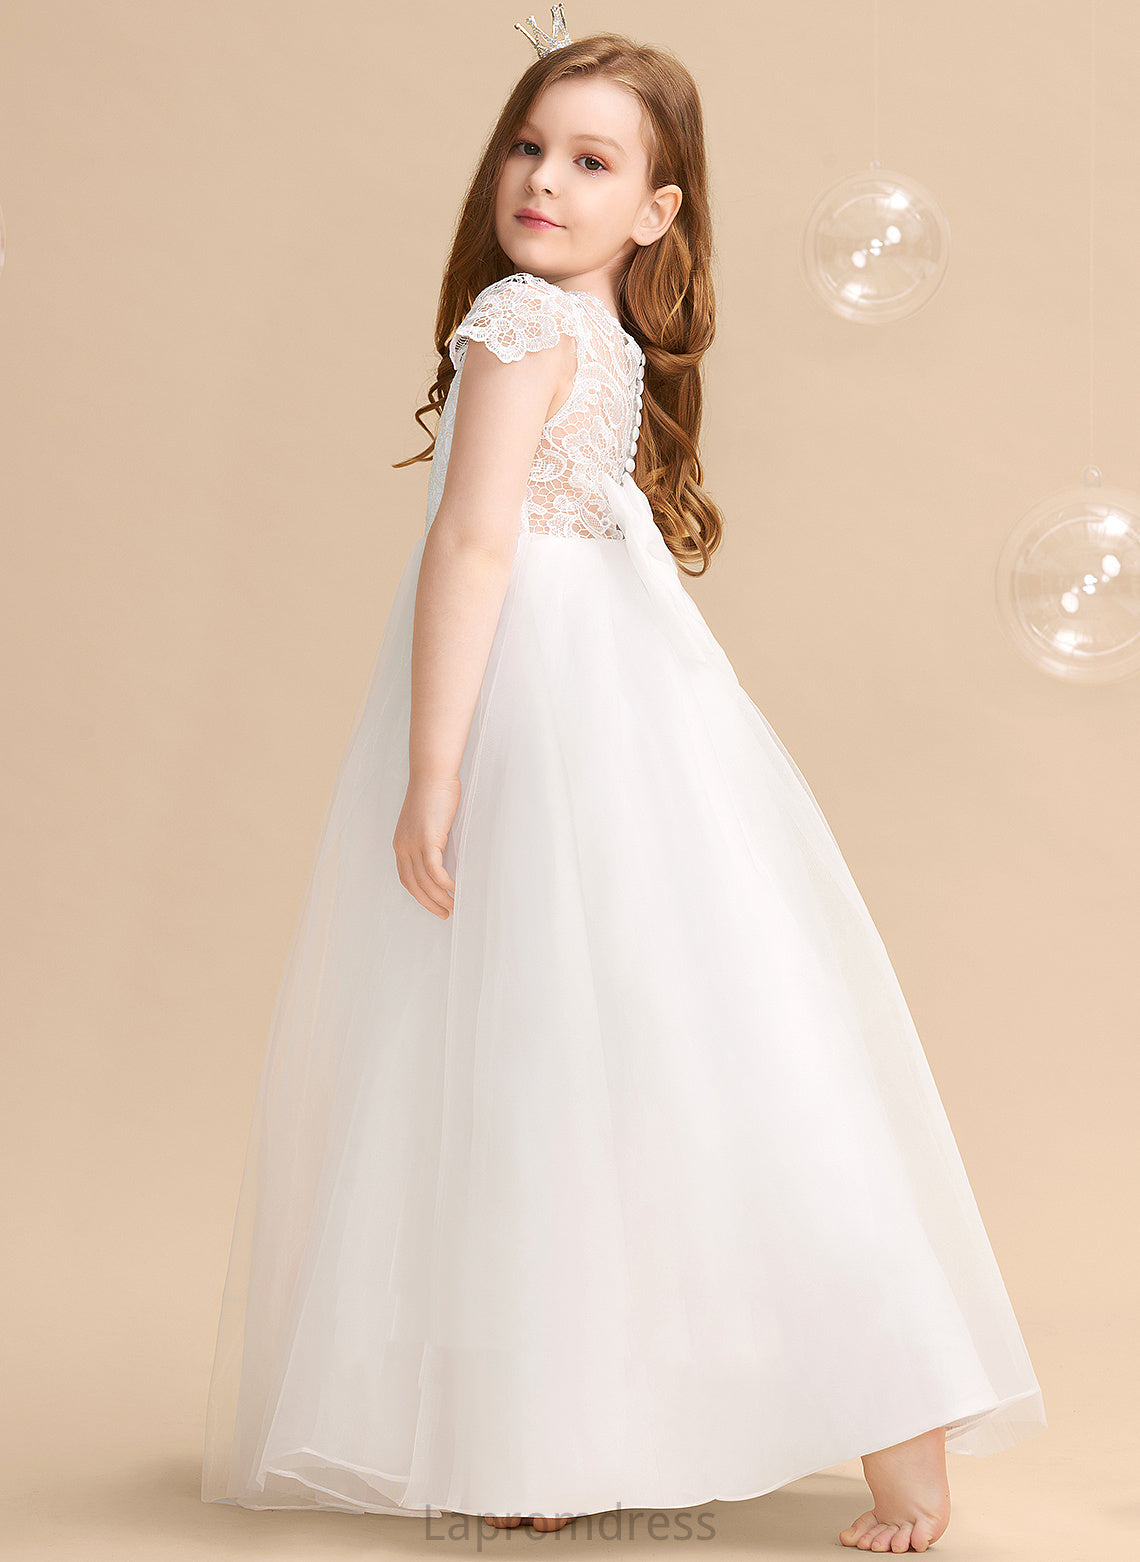 With - Dress Tulle/Lace Floor-length Kimberly Neck Flower Girl Dresses Short Scoop Ball-Gown/Princess Flower Girl Sleeves Bow(s)